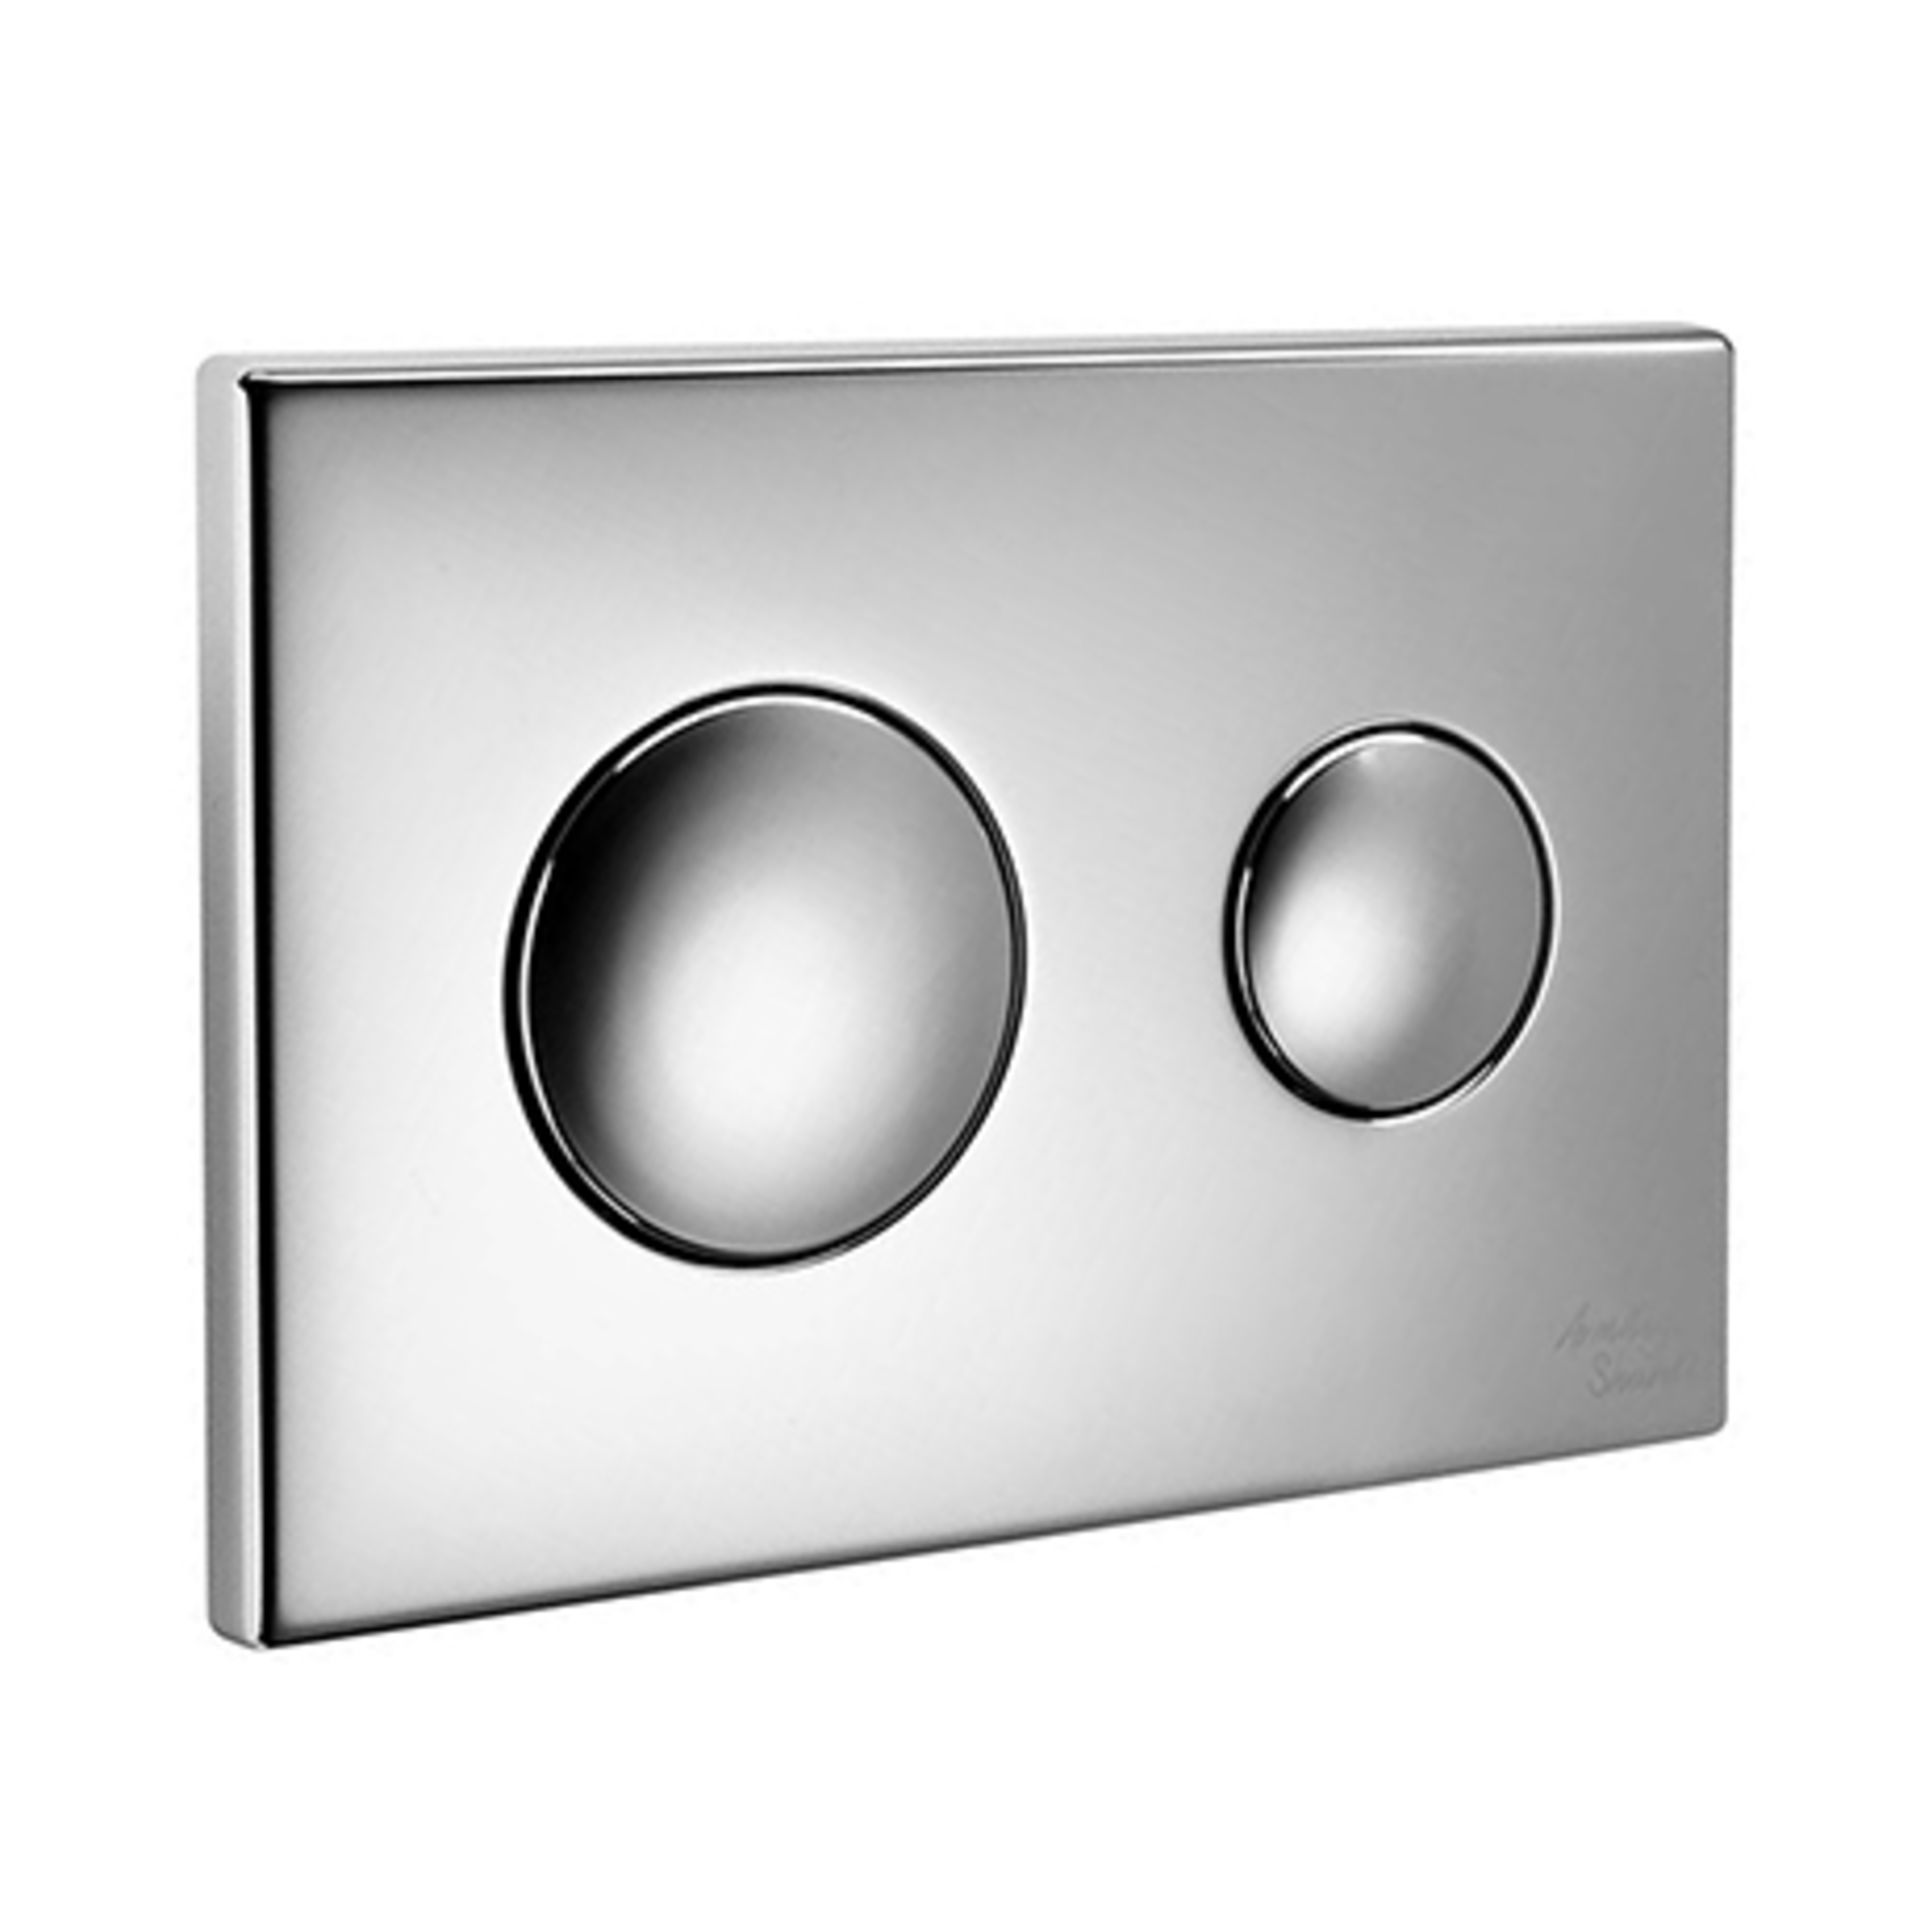 RRP £120. 2 x Ideal Standard Conceala 2 dual flush plate S4399AA. NEW